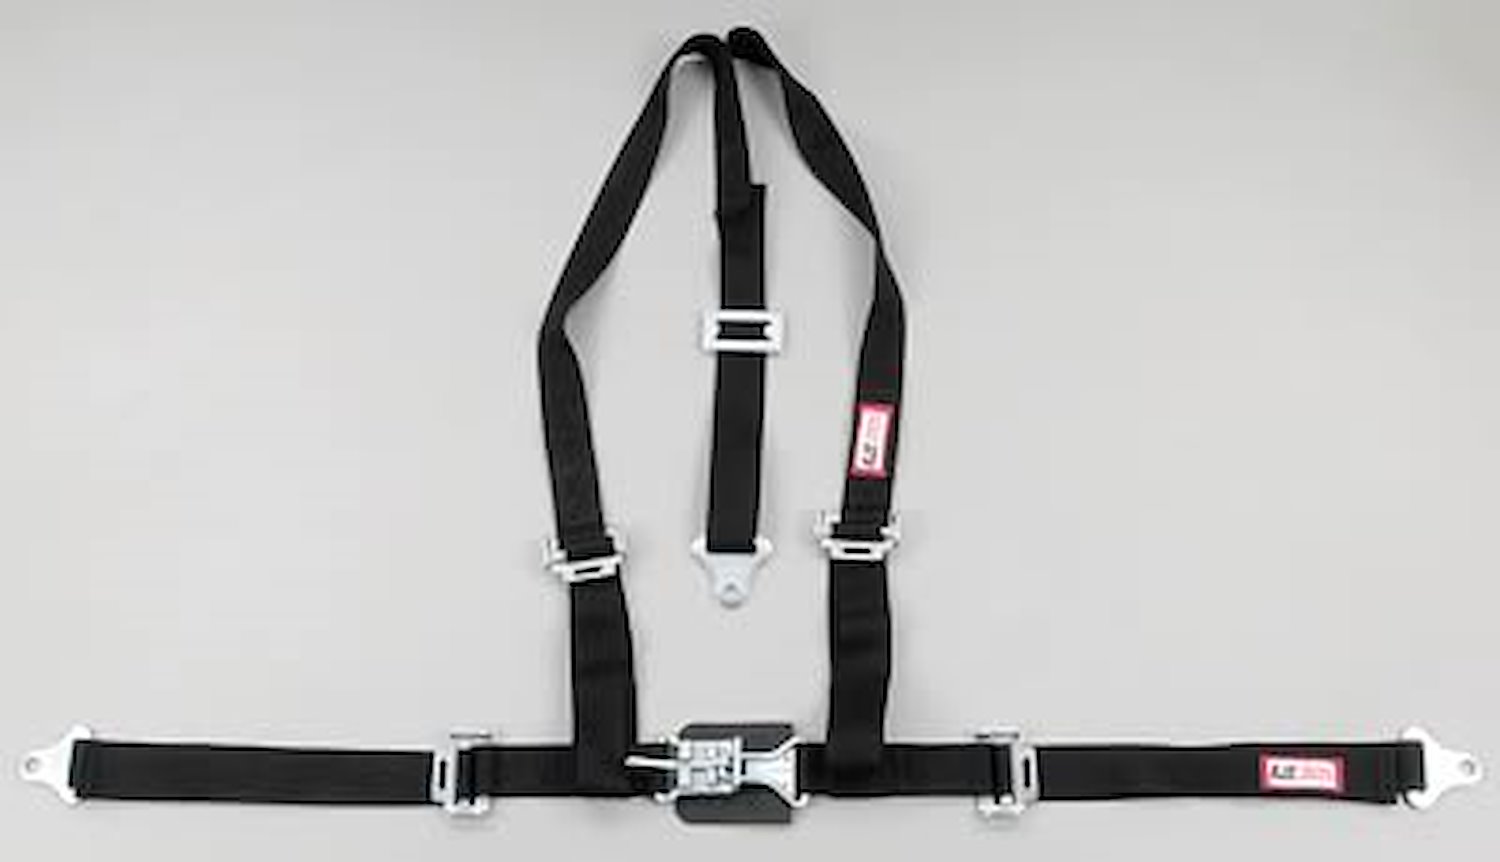 NON-SFI L&L HARNESS 3 PULL UP Lap Belt SNAP SEWN IN 2 S.H. Individual FLOOR Mount WRAP/SNAP YELLOW